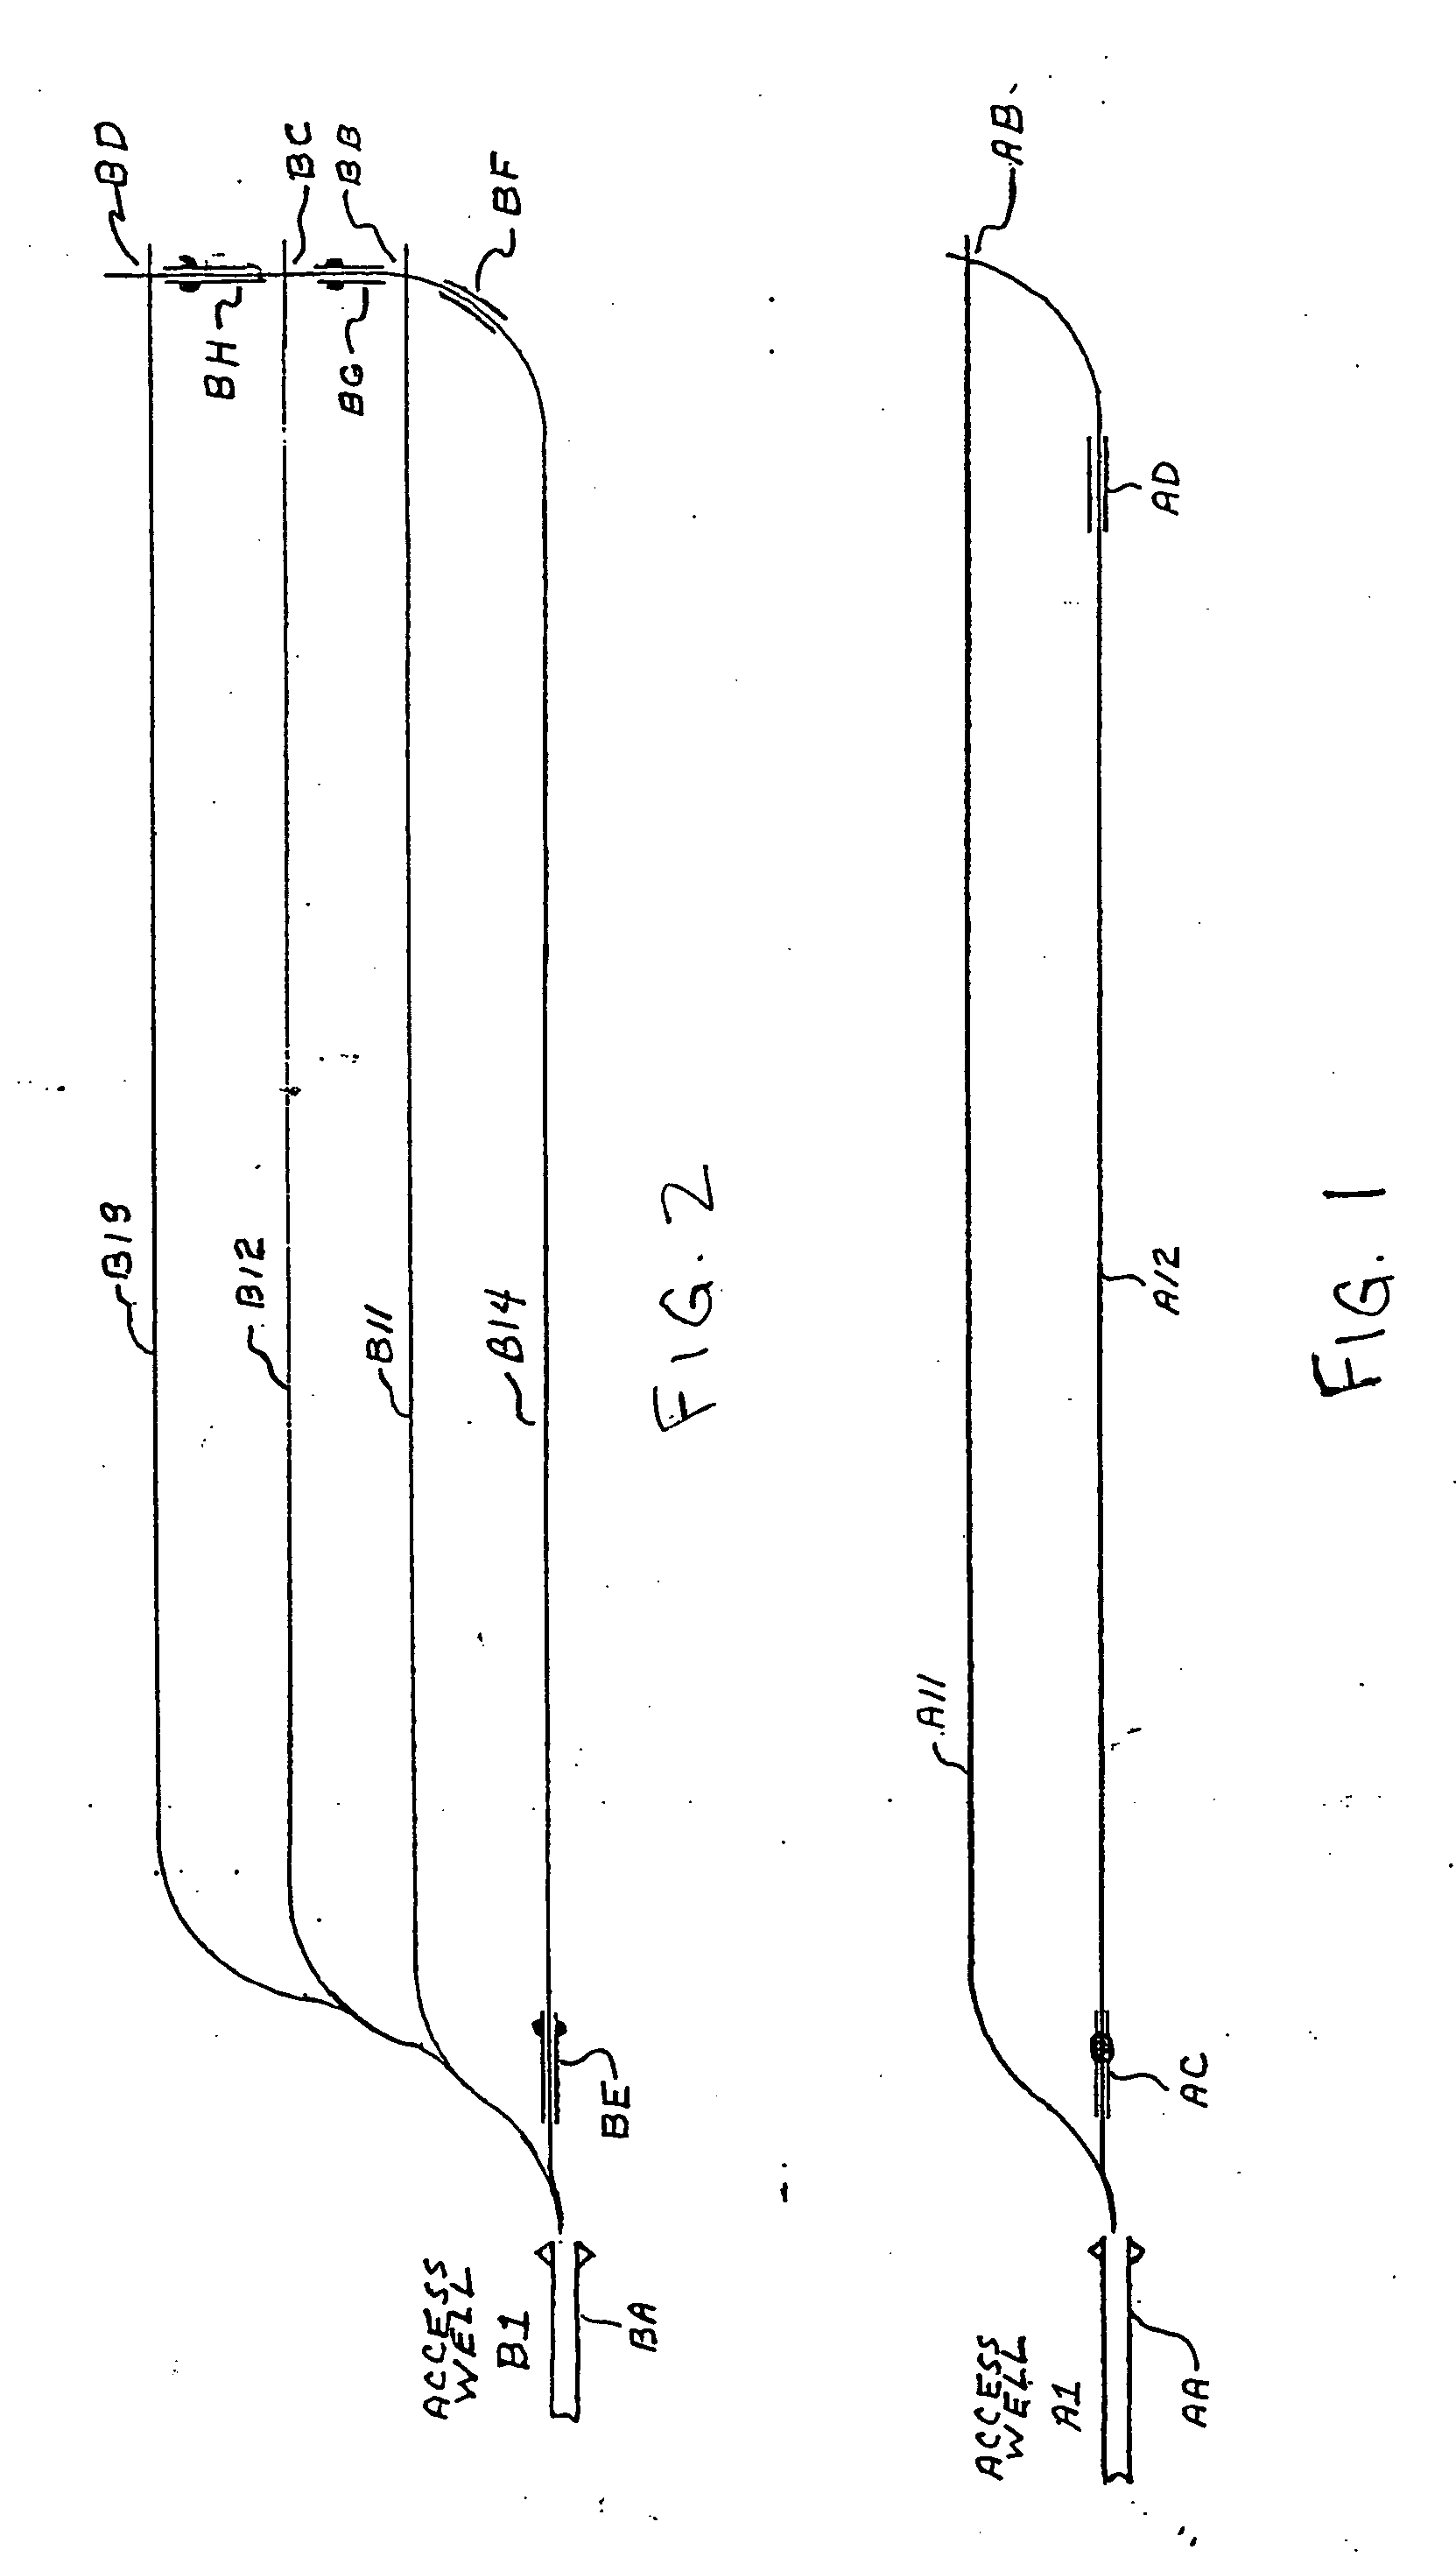 Methods for constructing underground borehole configurations and related solution mining methods